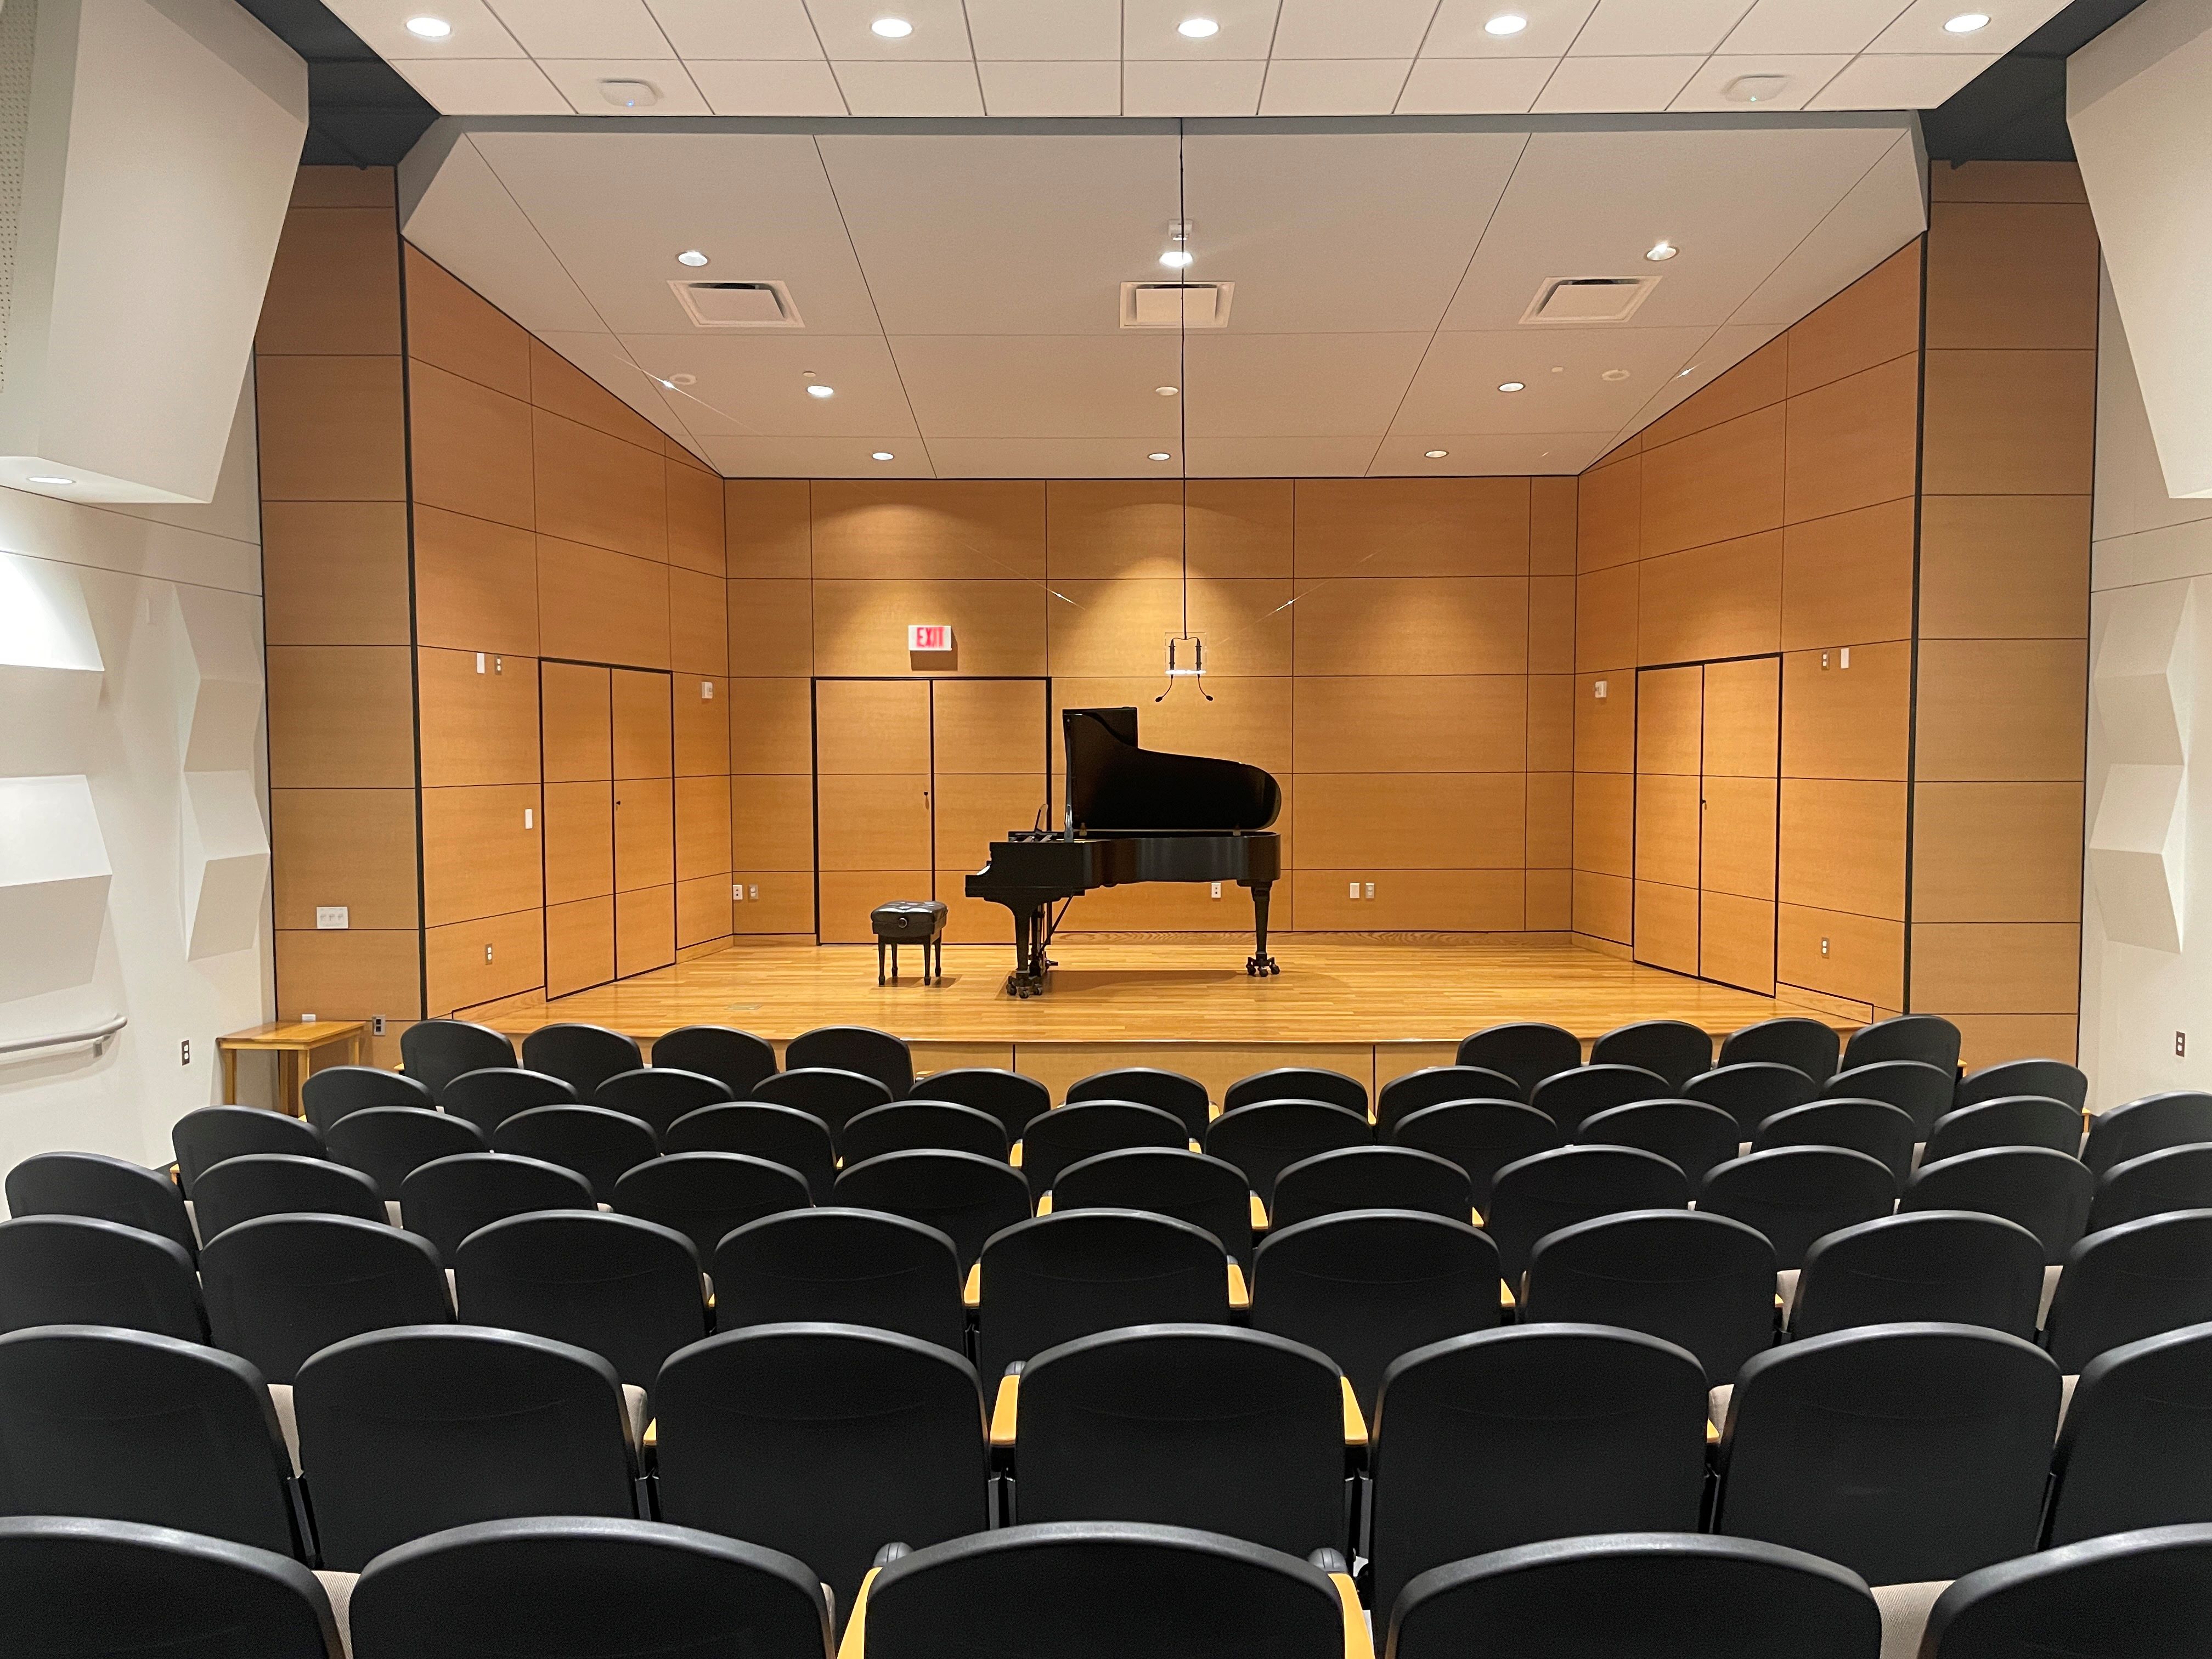 Image of Seddon Recital Hall from the audience area